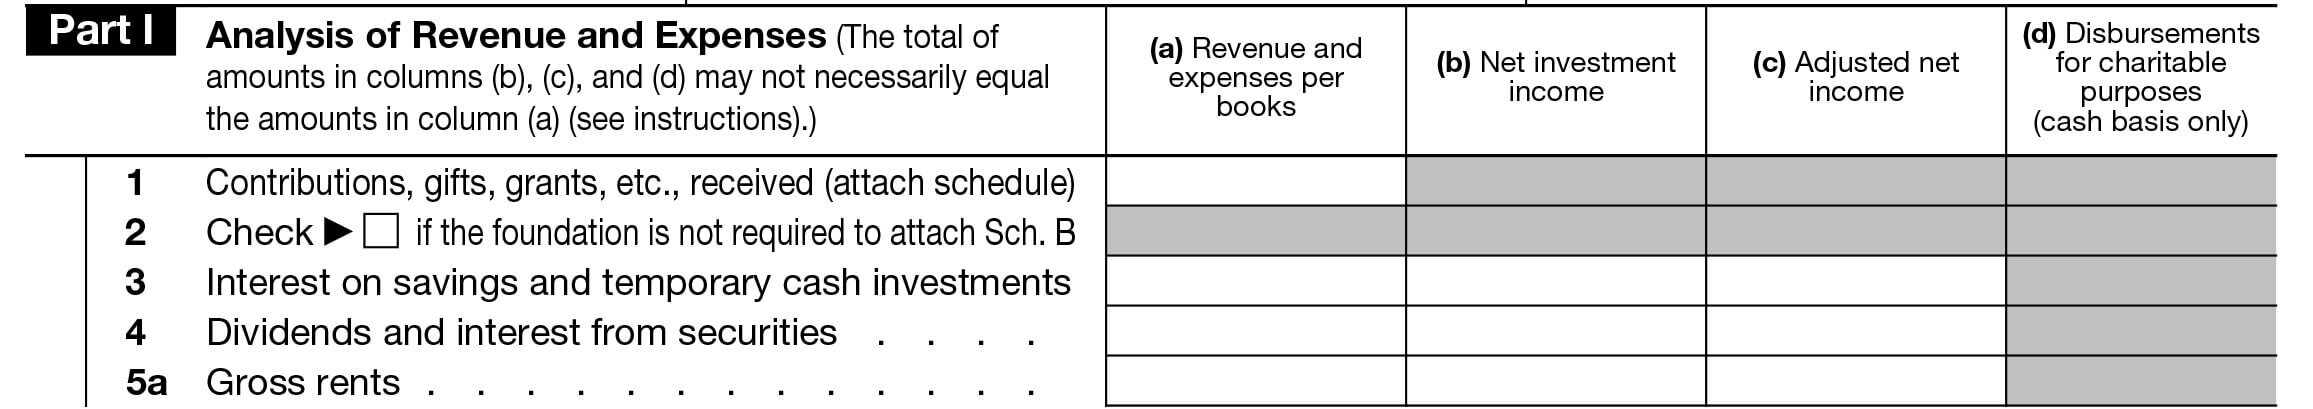 Part I - Analysis of Revenue and Expense